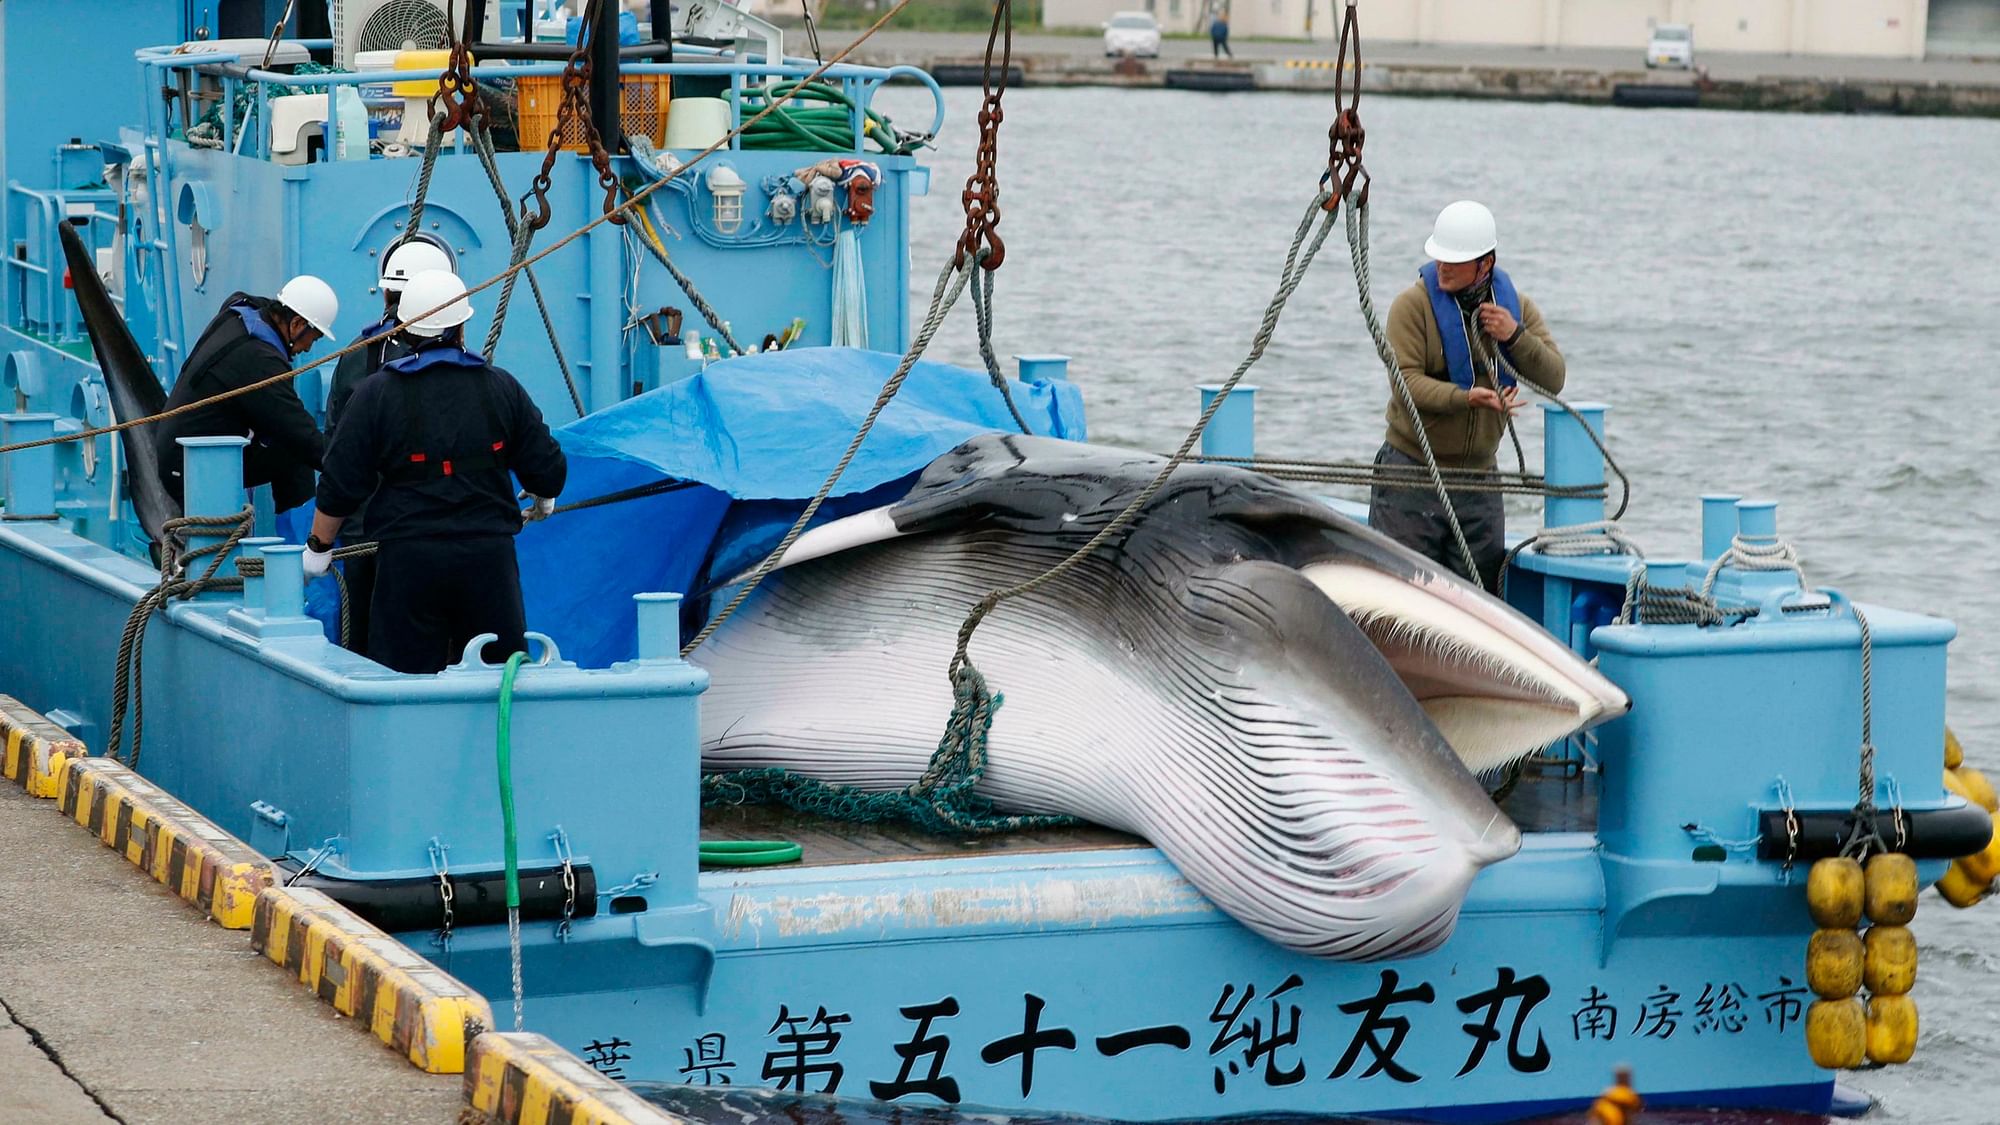 A whale is unloaded at a port in Kushiro, in the northernmost main island of Hokkaido, Monday, July 1, 2019